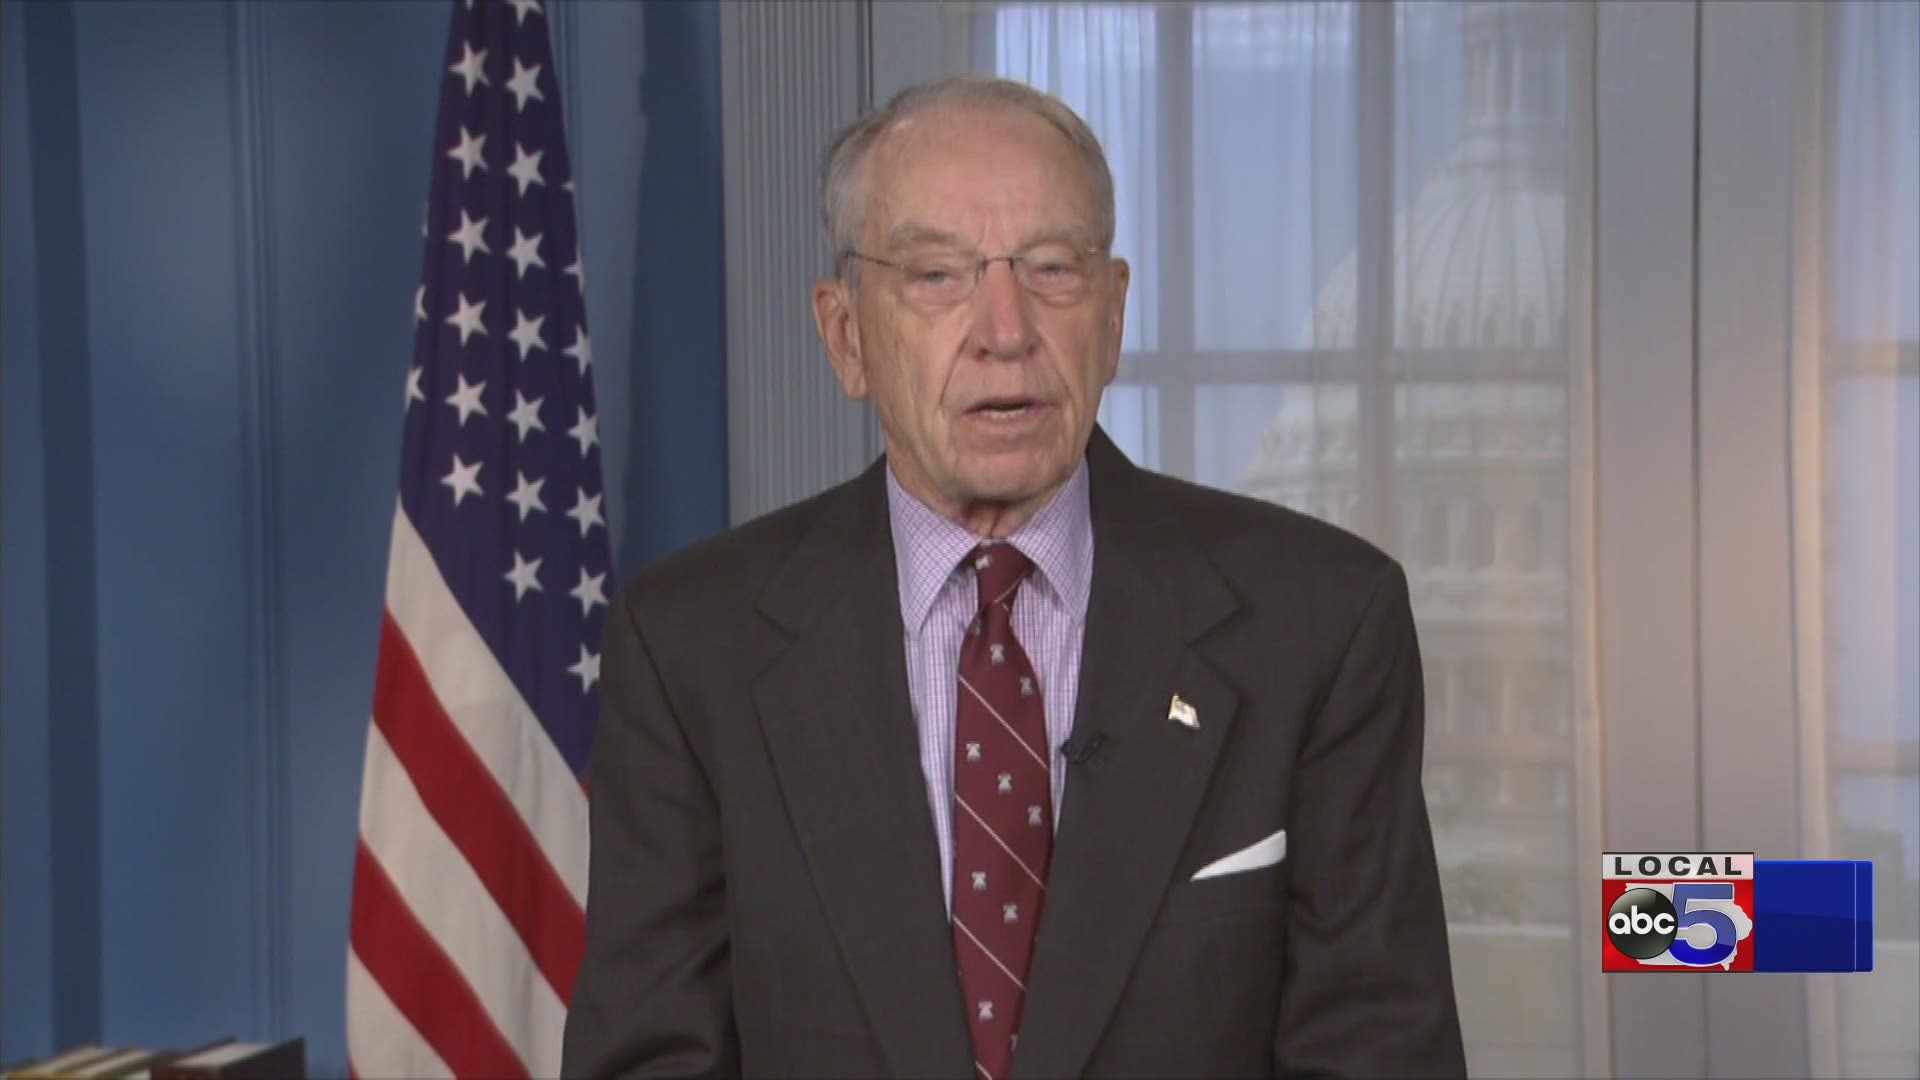 Information on Trump's executive order on policing reform as well as what U.S. Sen. Chuck Grassley thinks about it.